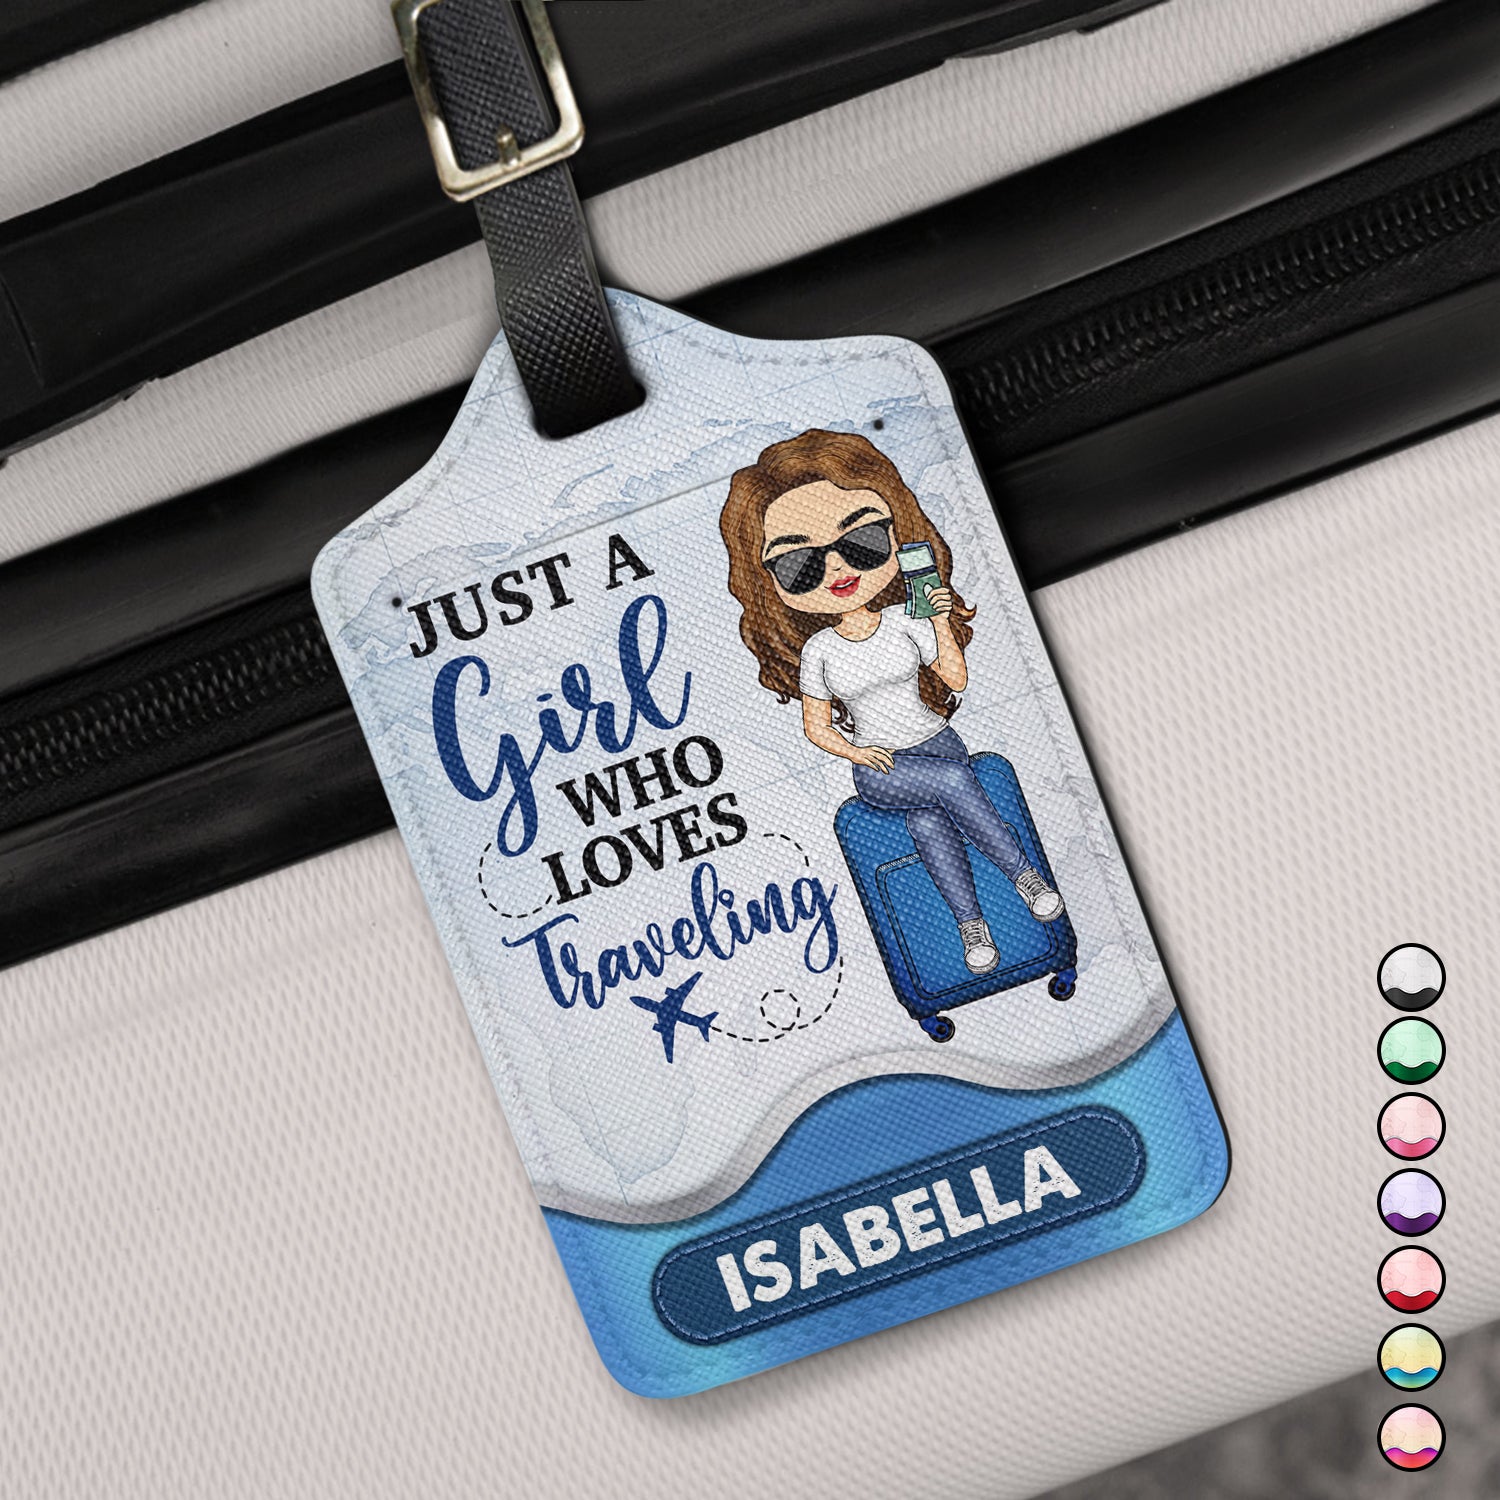 Just A Girl Boy Who Loves Traveling - Birthday Gift For Him, Her, Vacation Lovers - Personalized Luggage Tag